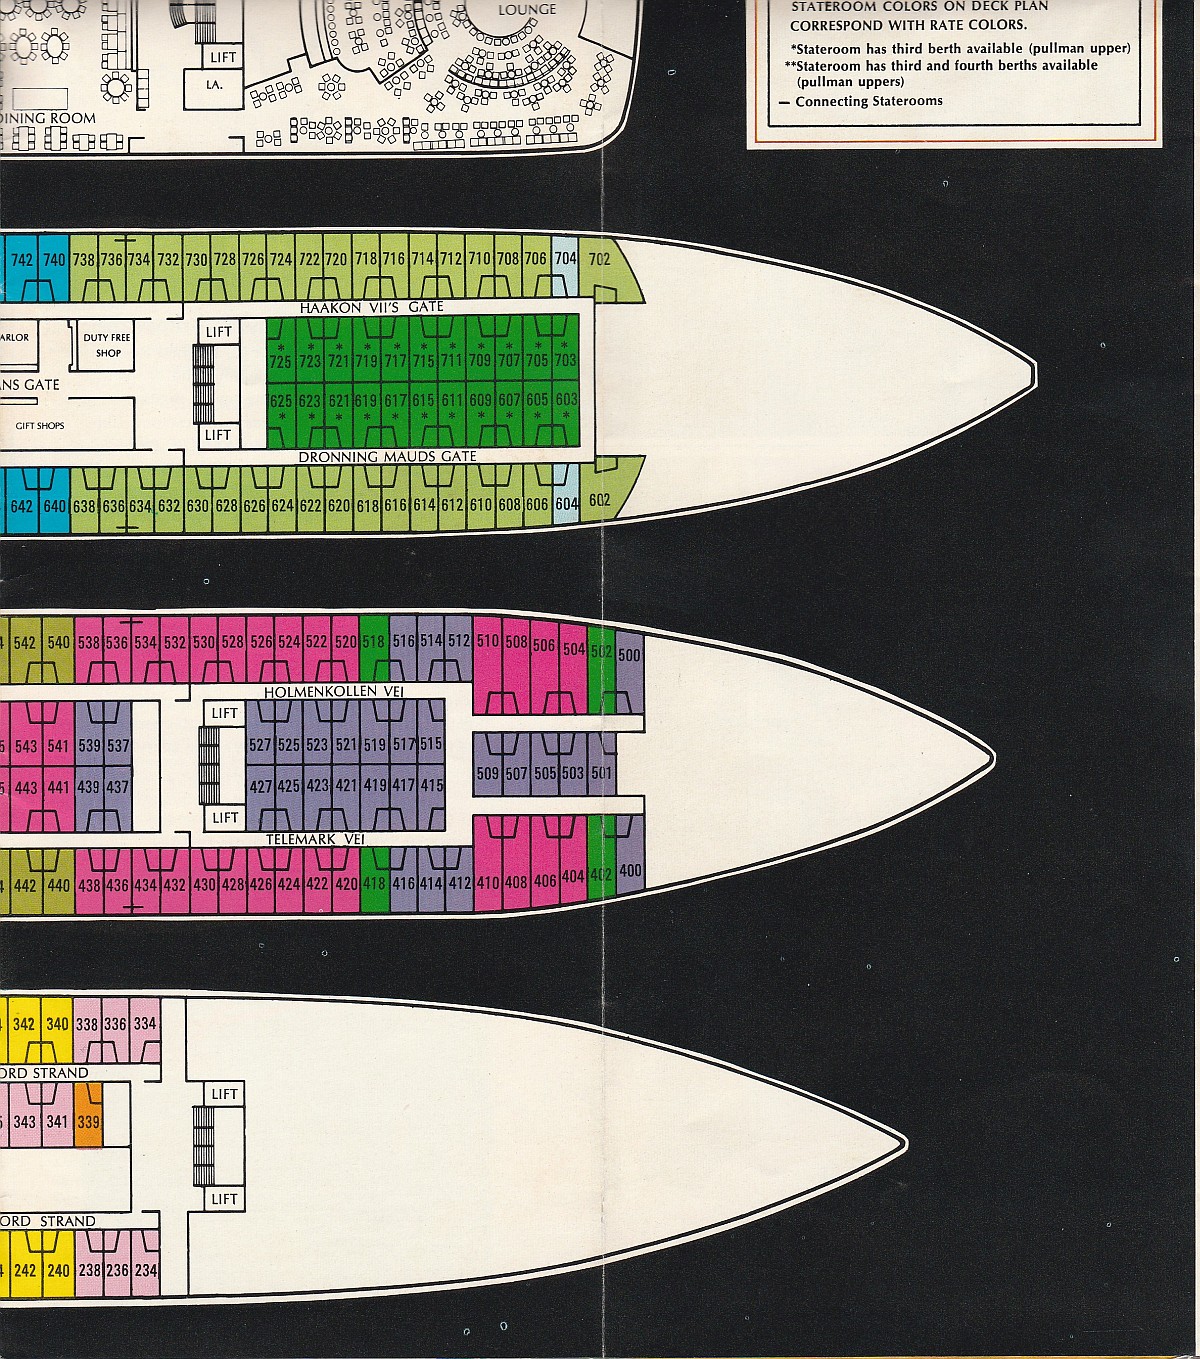 ms Song of Norway Forward deck plans: Restaurant Deck, Main Deck, A Deck and B Deck